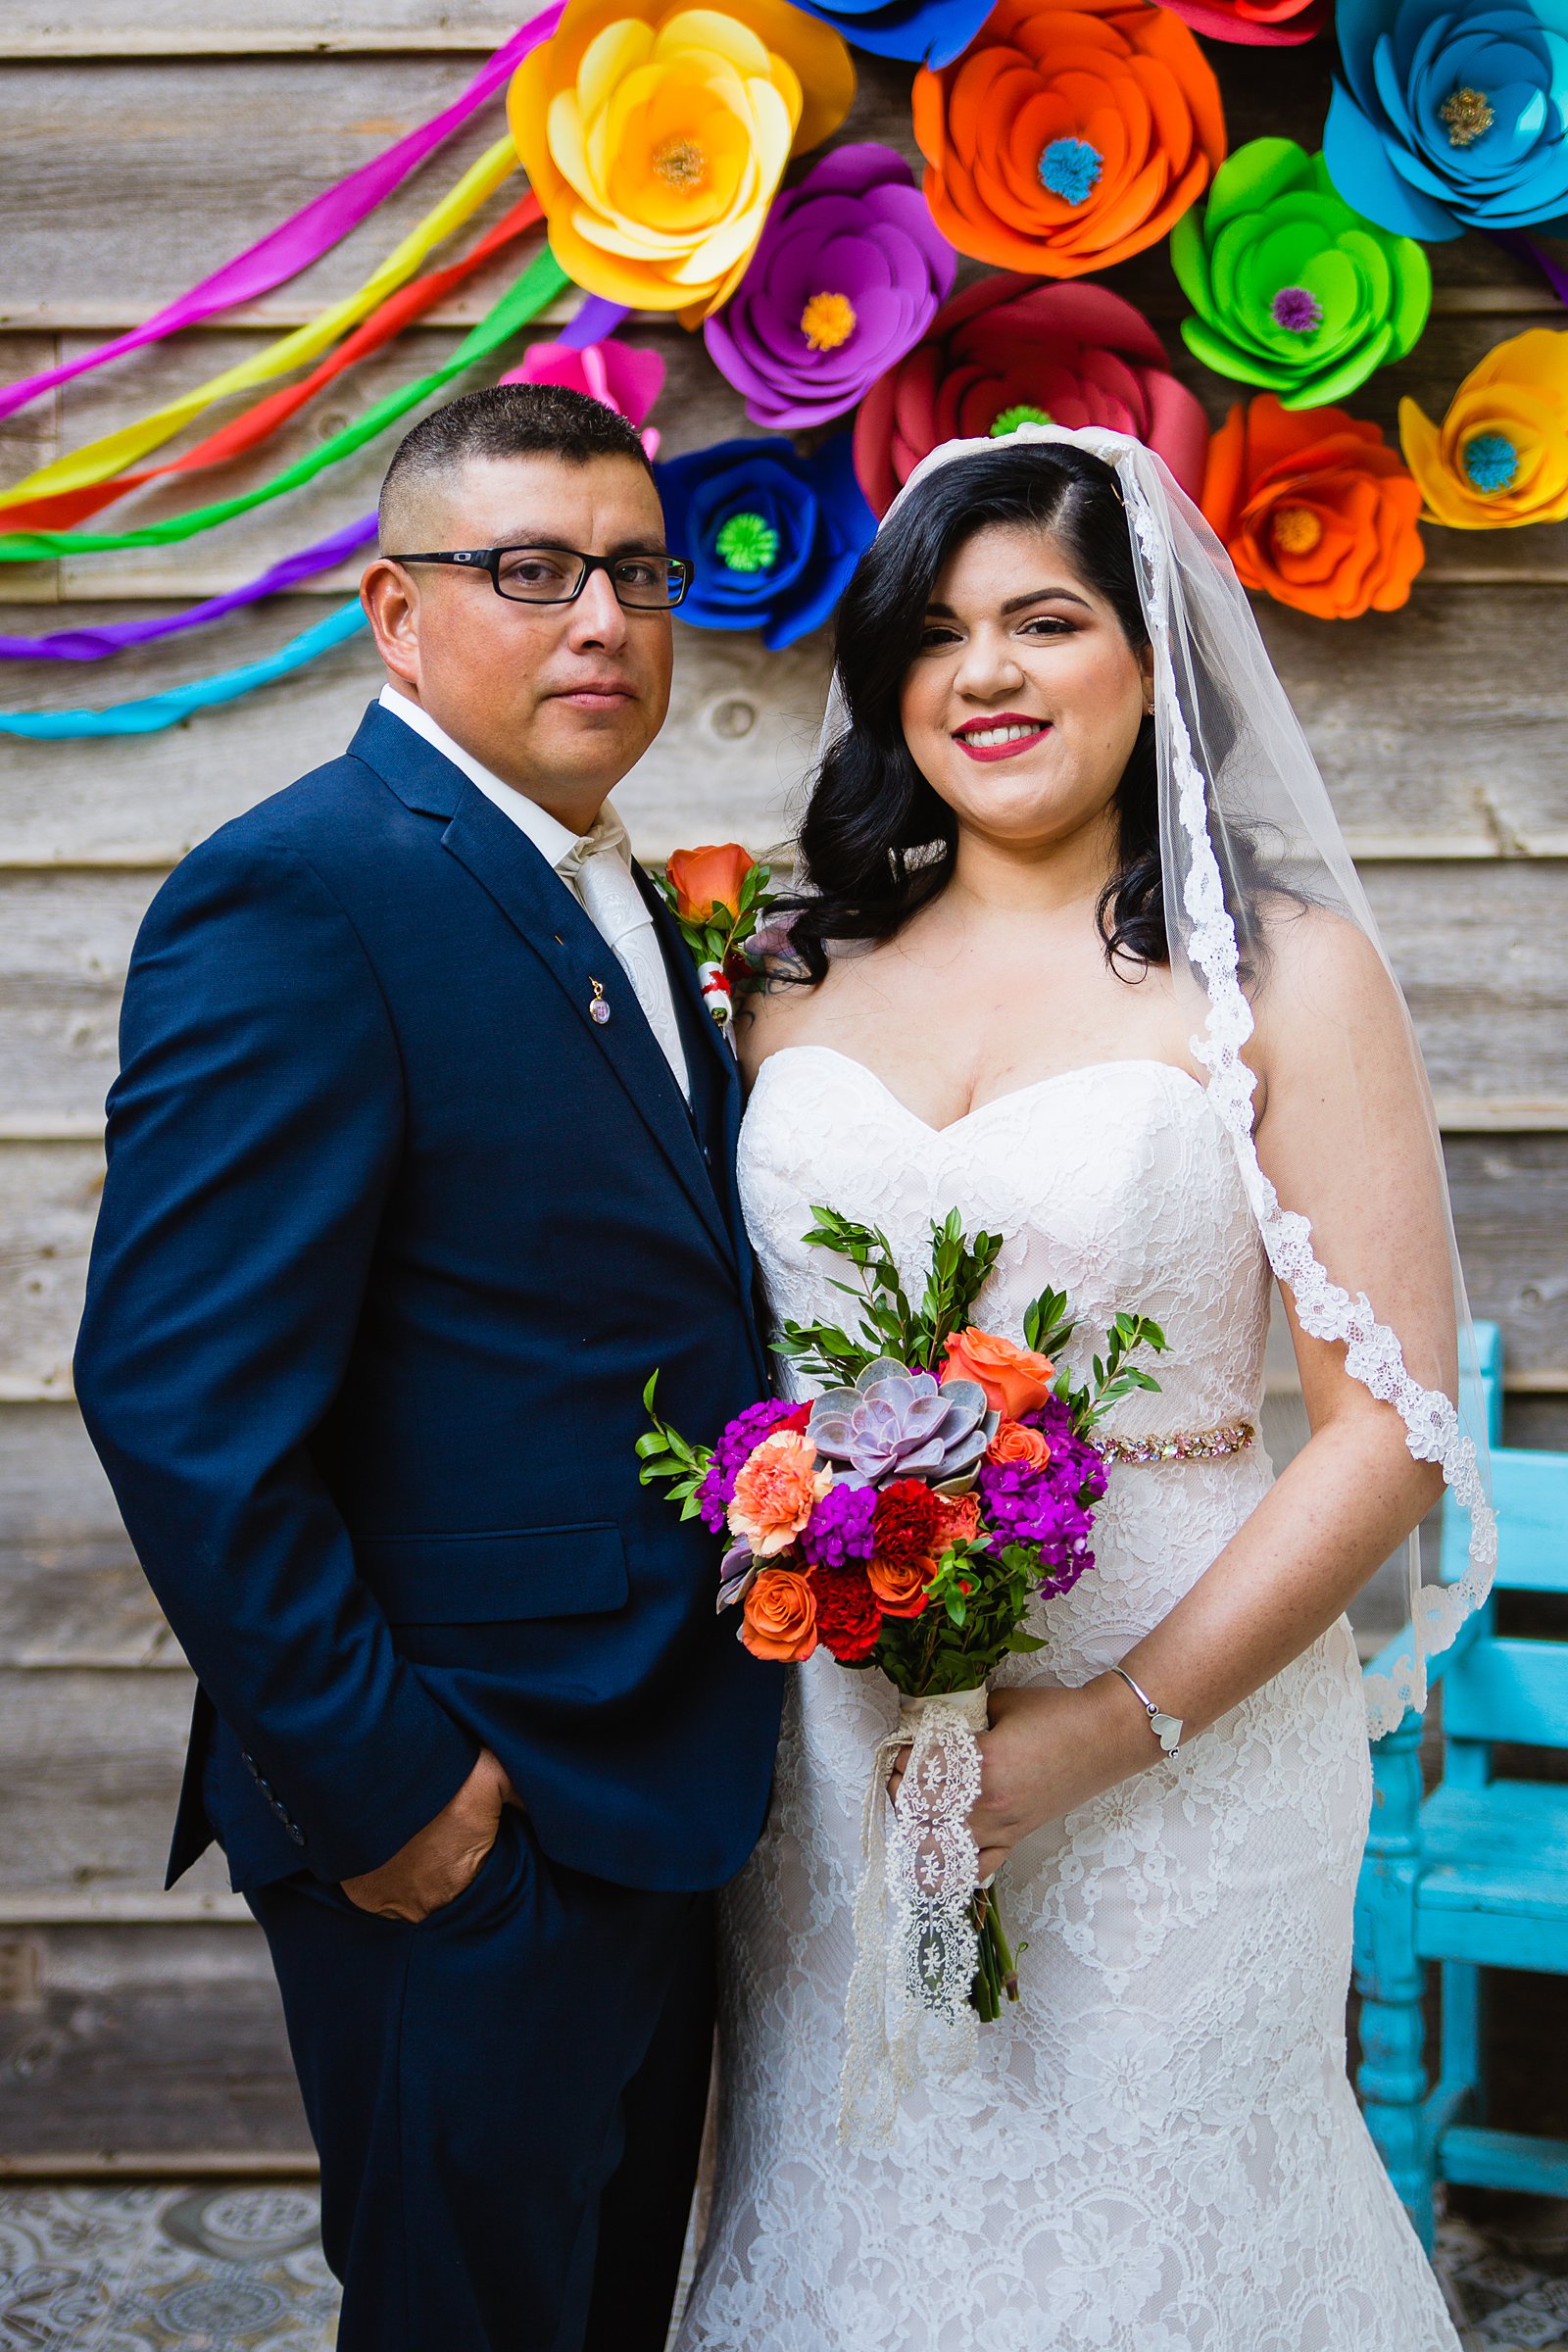 Bride and groom pose in front of a fiesta photo booth backdrop during their The Farmhouse at Schnepf Farms wedding by Arizona wedding photographer PMA Photography.